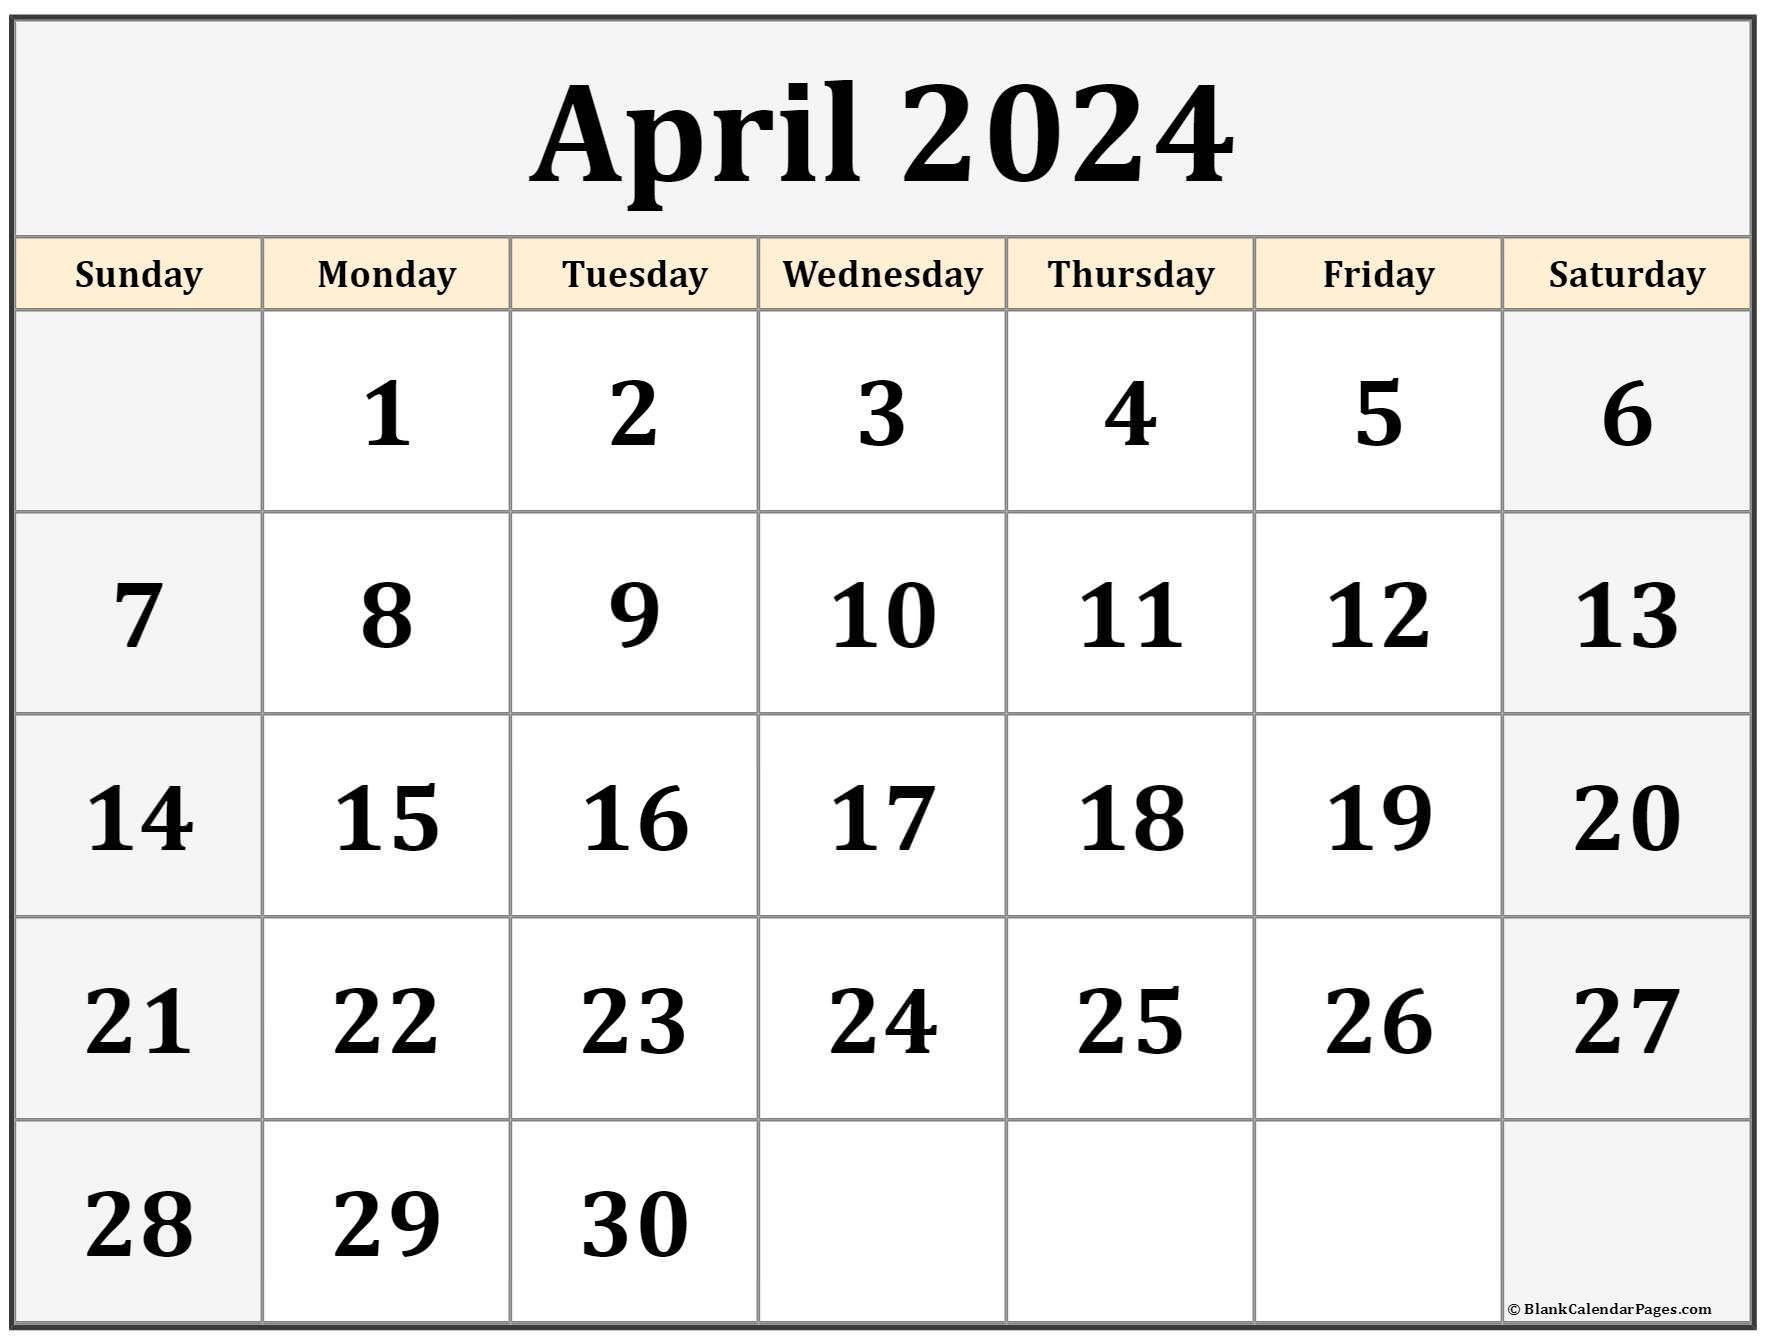 April 2024 Calendar Of The Month Free Printable April Calendar Of The - Free Printable Calendar April 2024 Calendar